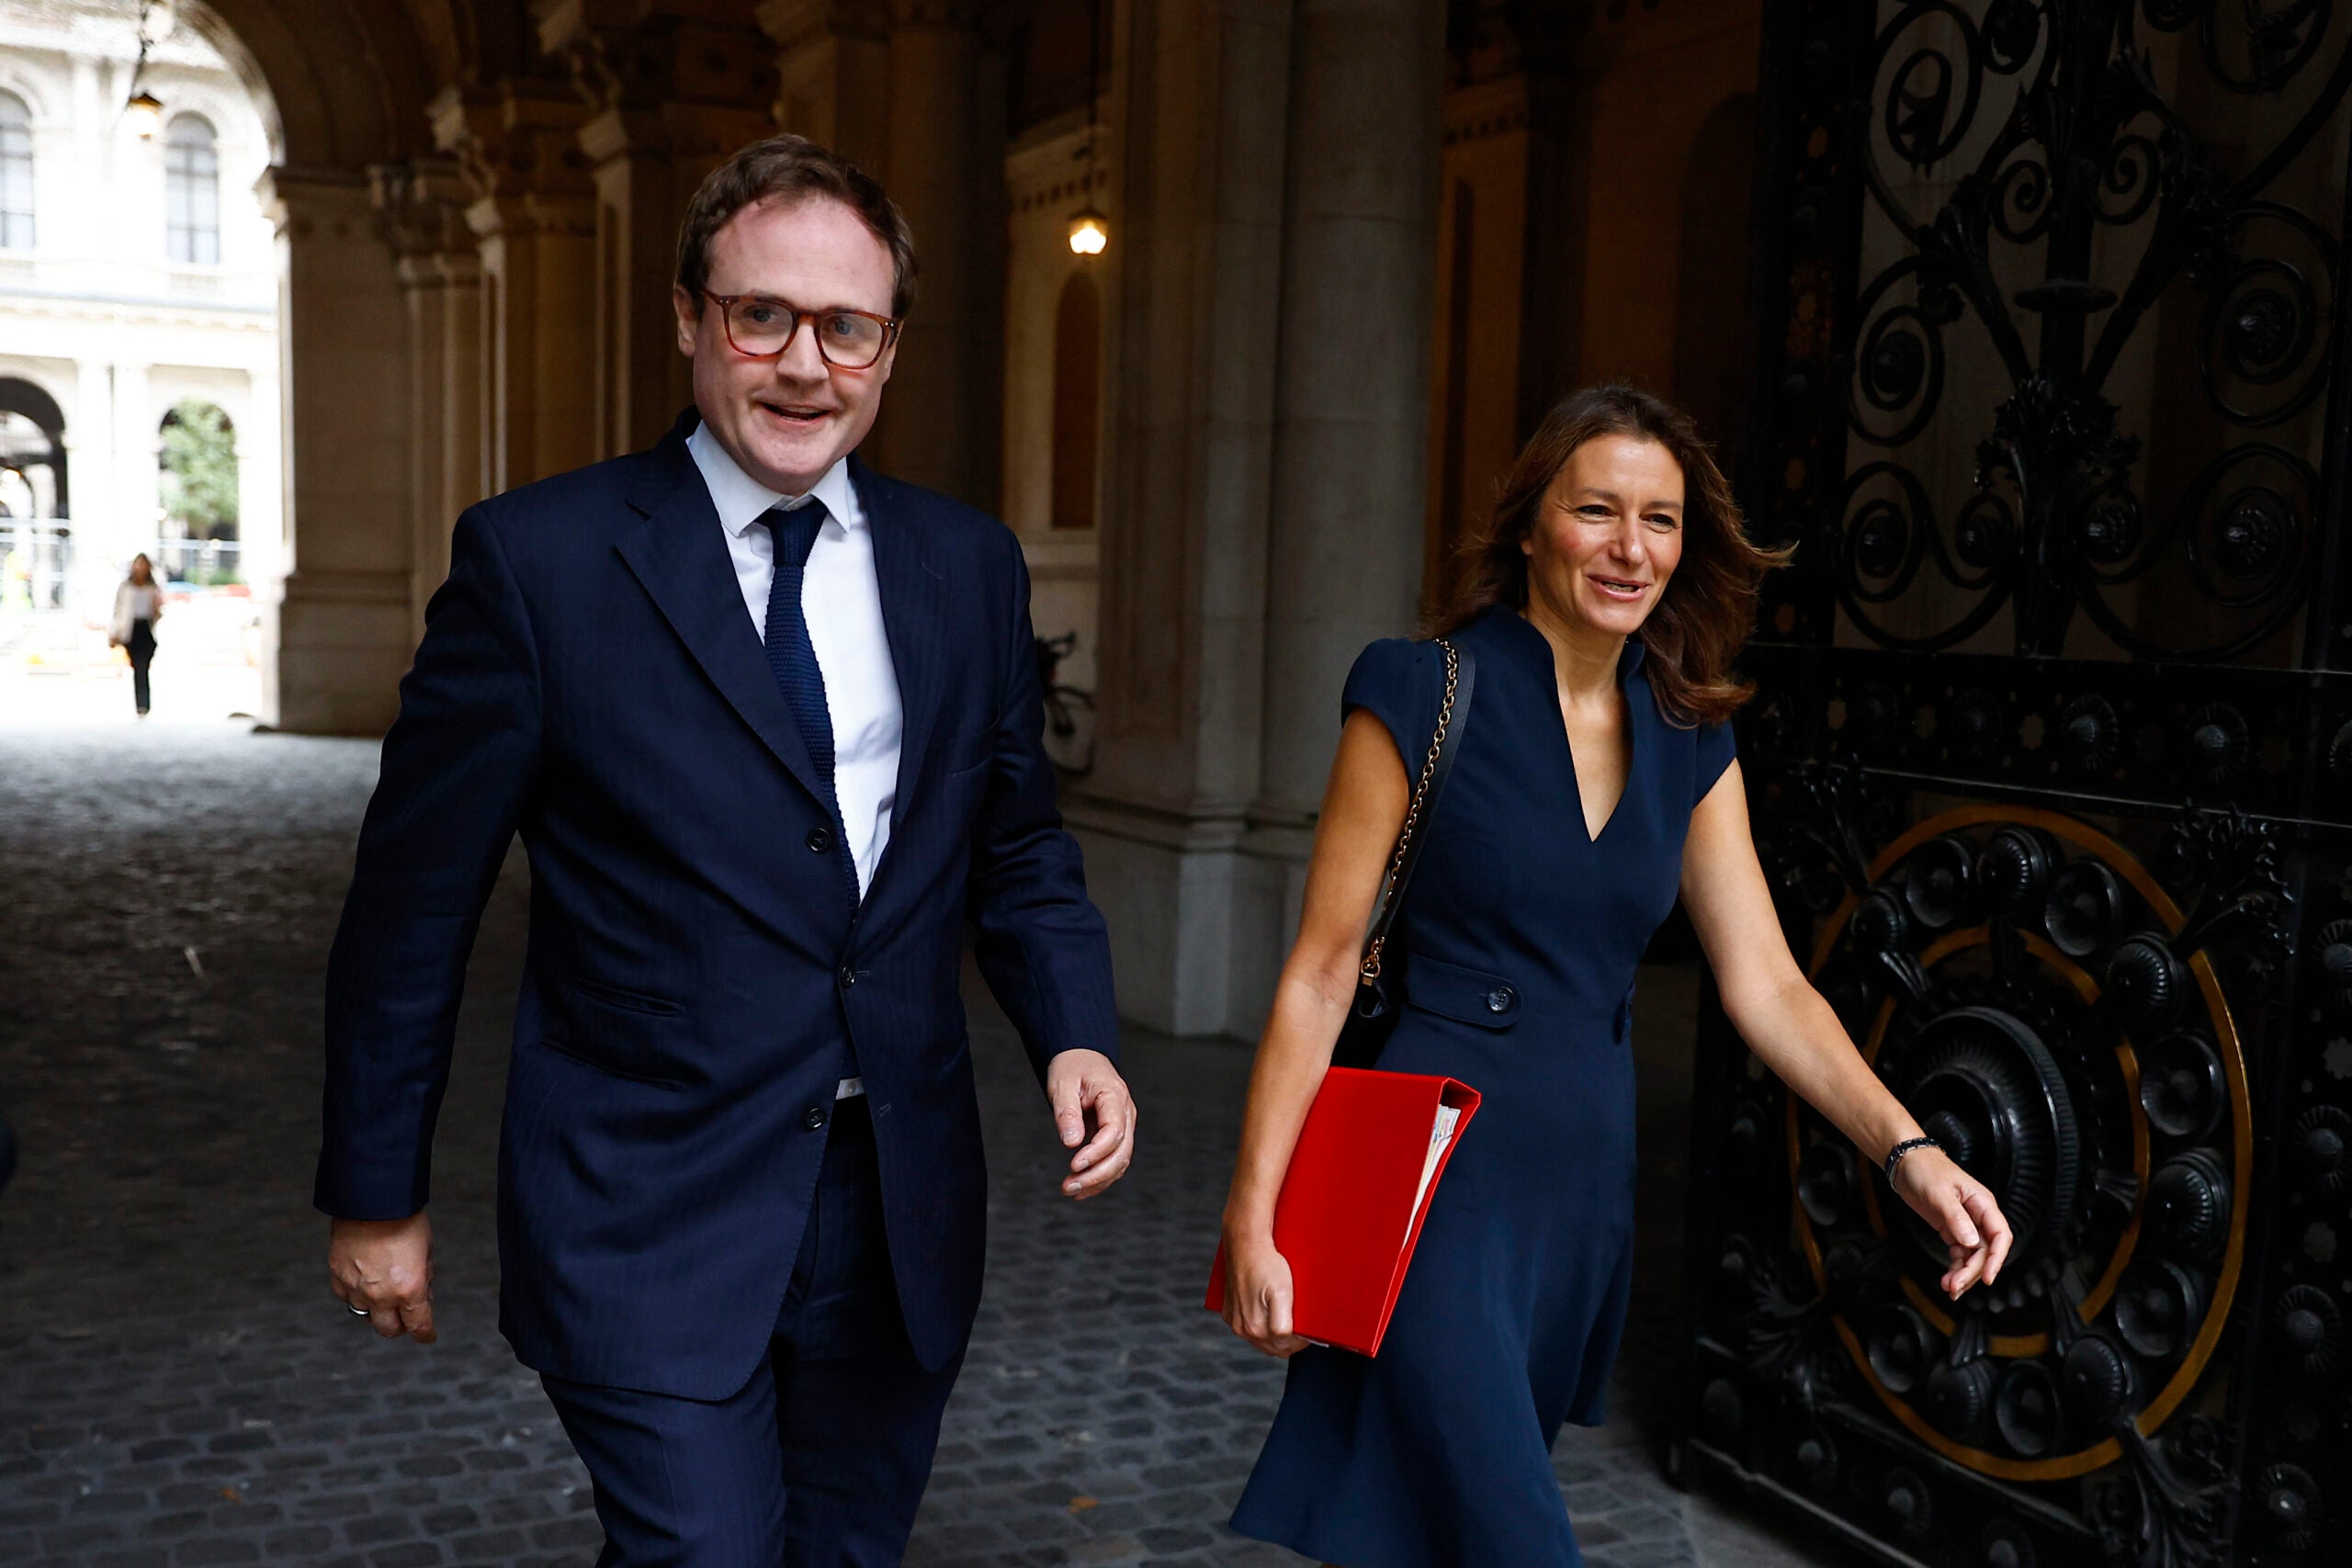 LONDON, ENGLAND - SEPTEMBER 12:  Minister of State for Security Tom Tugendhat and Secretary of State for Digital, Culture, Media and Sport Lucy Frazer arrive for a cabinet meeting at Downing Street on September 12, 2023 in London, England. (Photo by Peter Nicholls/Getty Images)